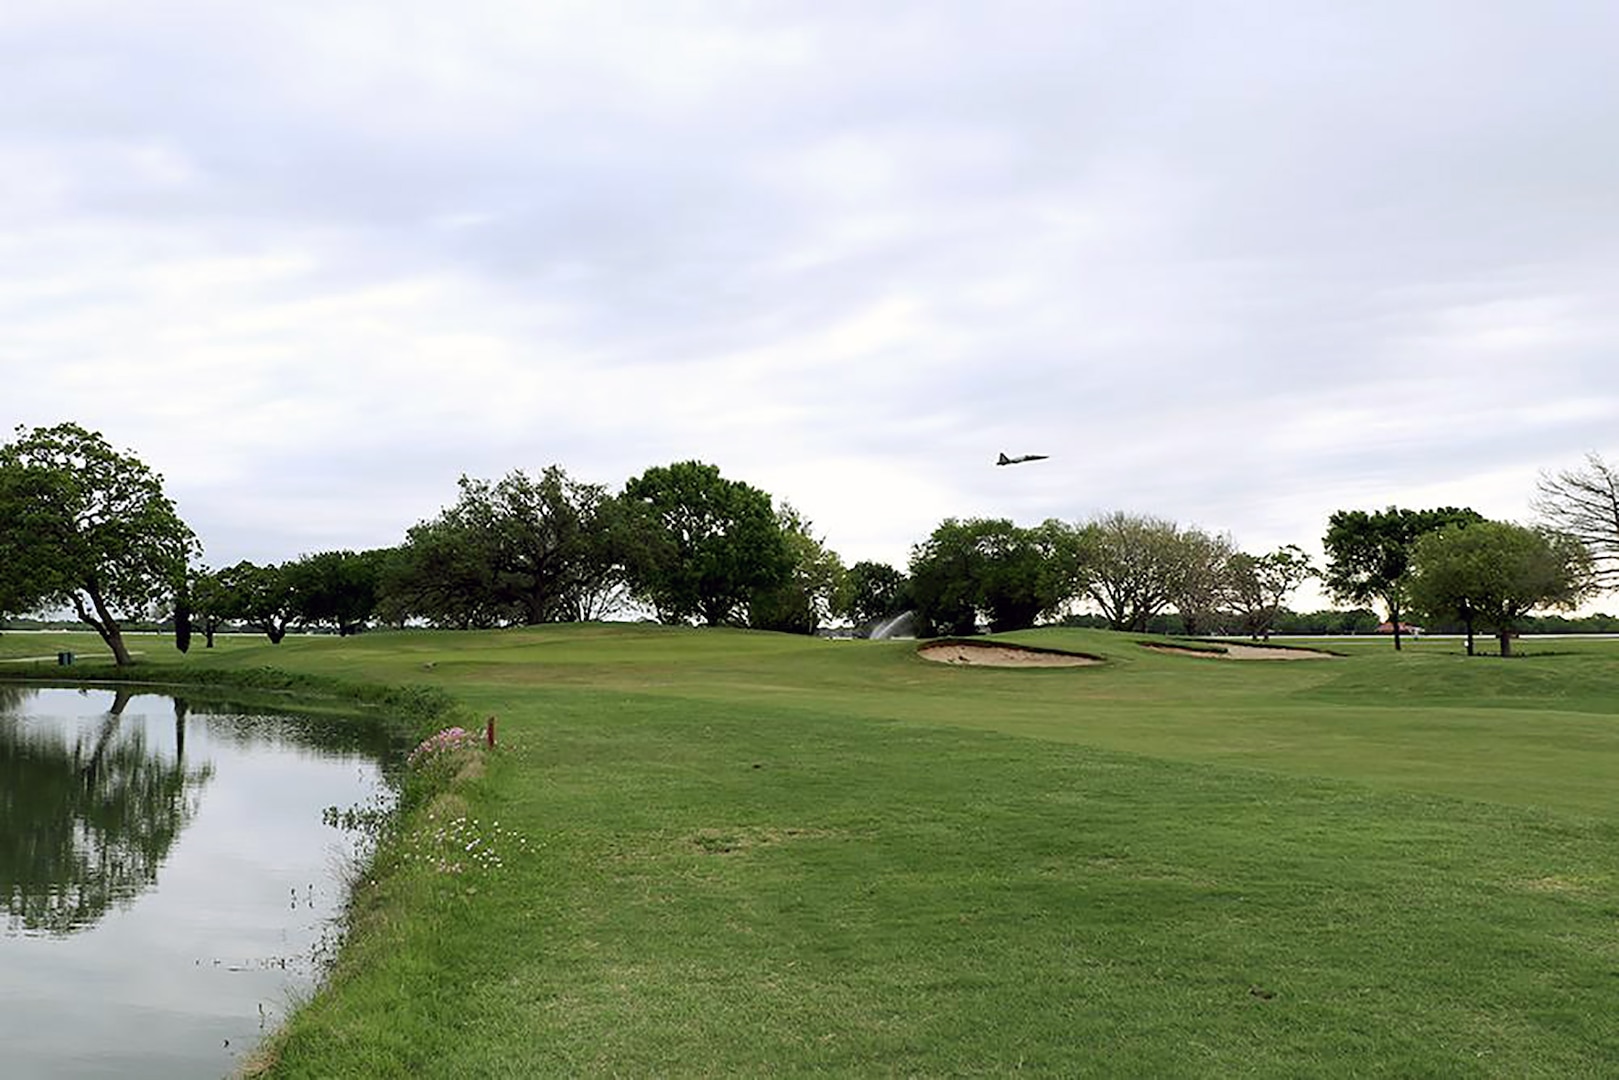 Kenneth Boyce, Randolph Oaks Golf Course manager and superintendent, will share his years of experience tending the greens and fairways of JBSA-Randolph’s golf course during a presentation called “Get Greener Grass! – Preparing for Winter” from 9:30 to 10:30 a.m. Aug. 22 on the facility’s back patio.